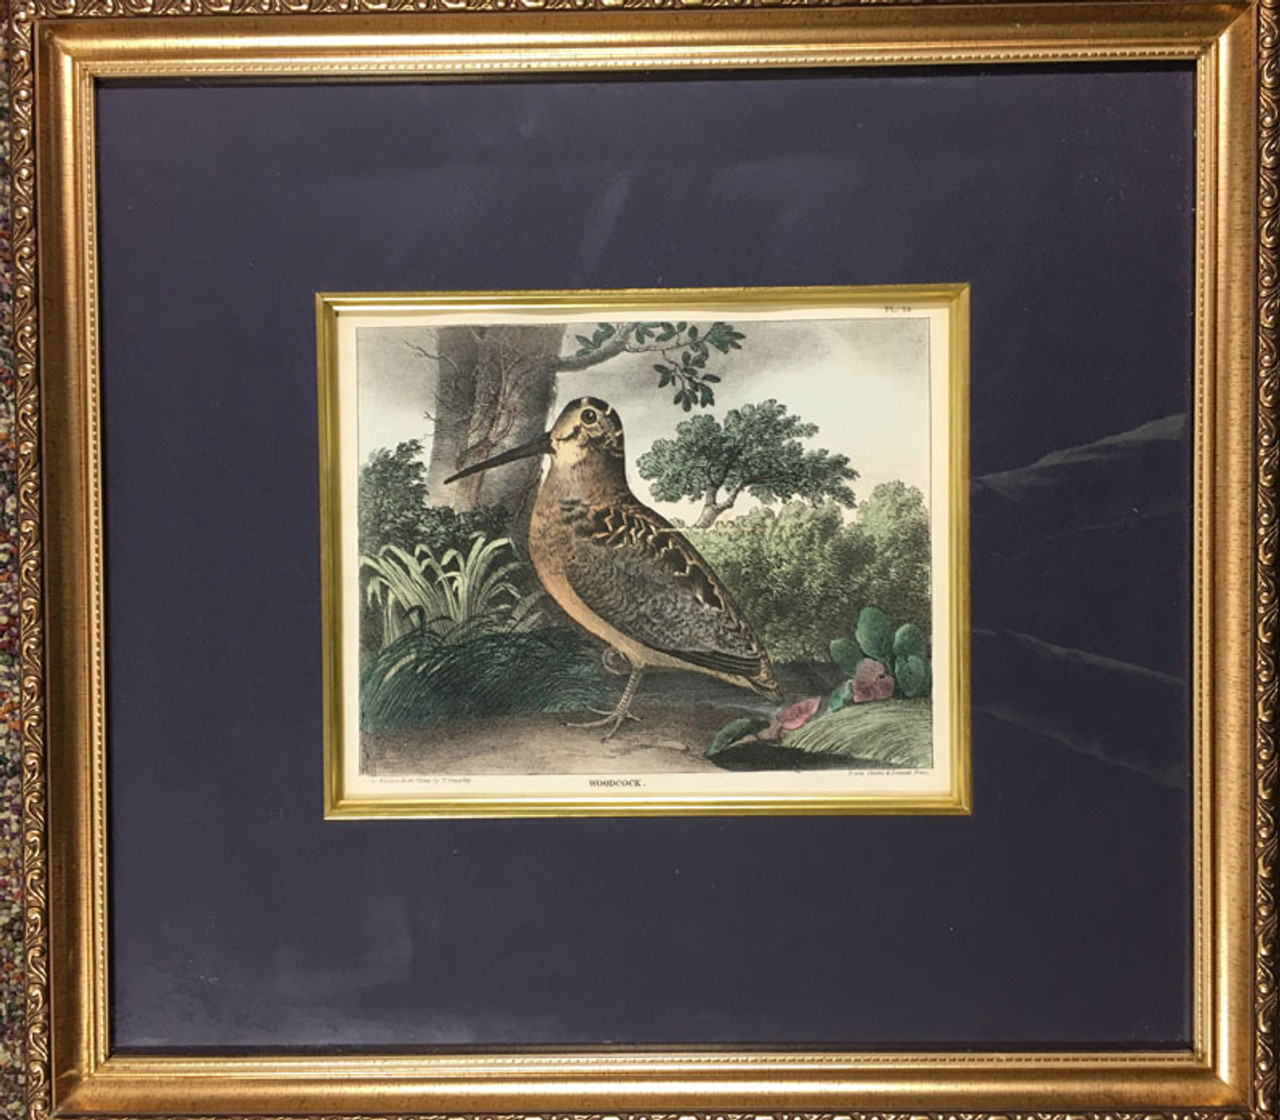 Woodcock from Cabinet of Natural HistorySports